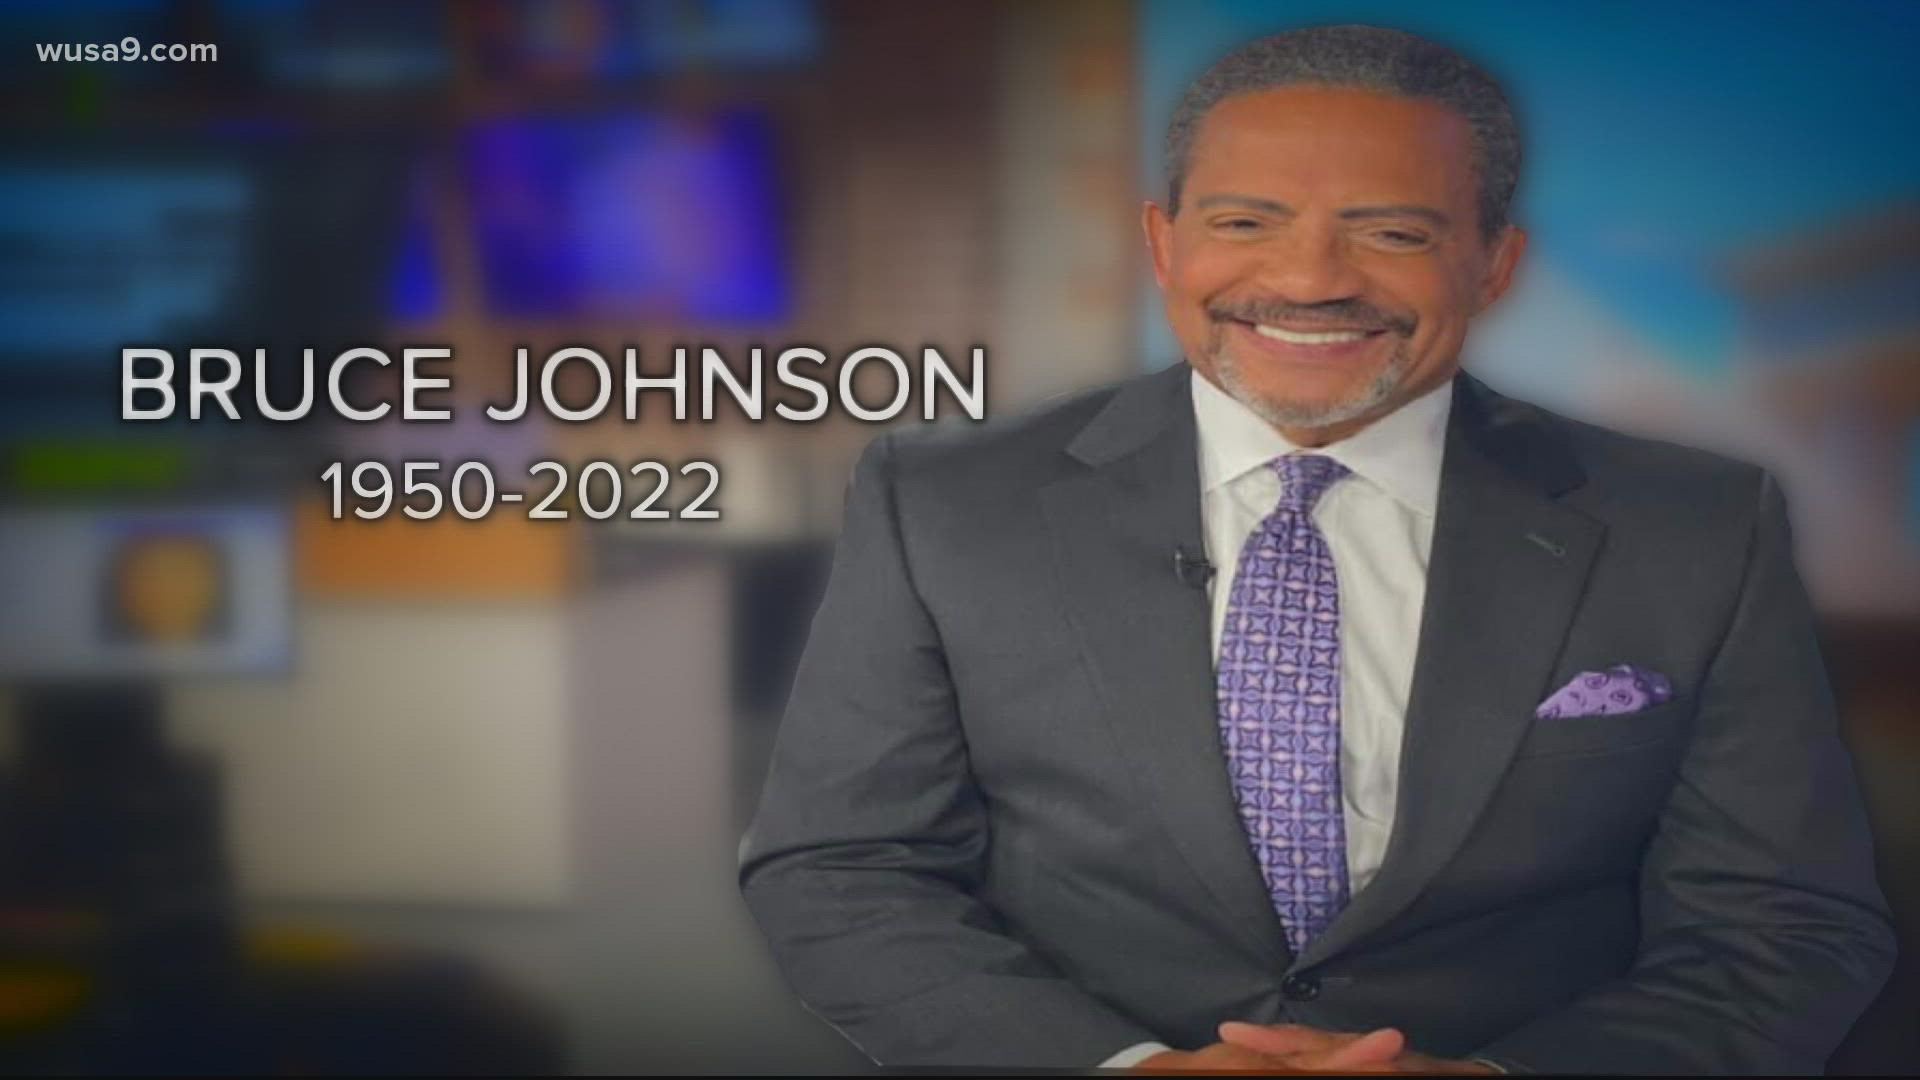 Our beloved WUSA9 colleague who retired in December 2020 died Sunday.